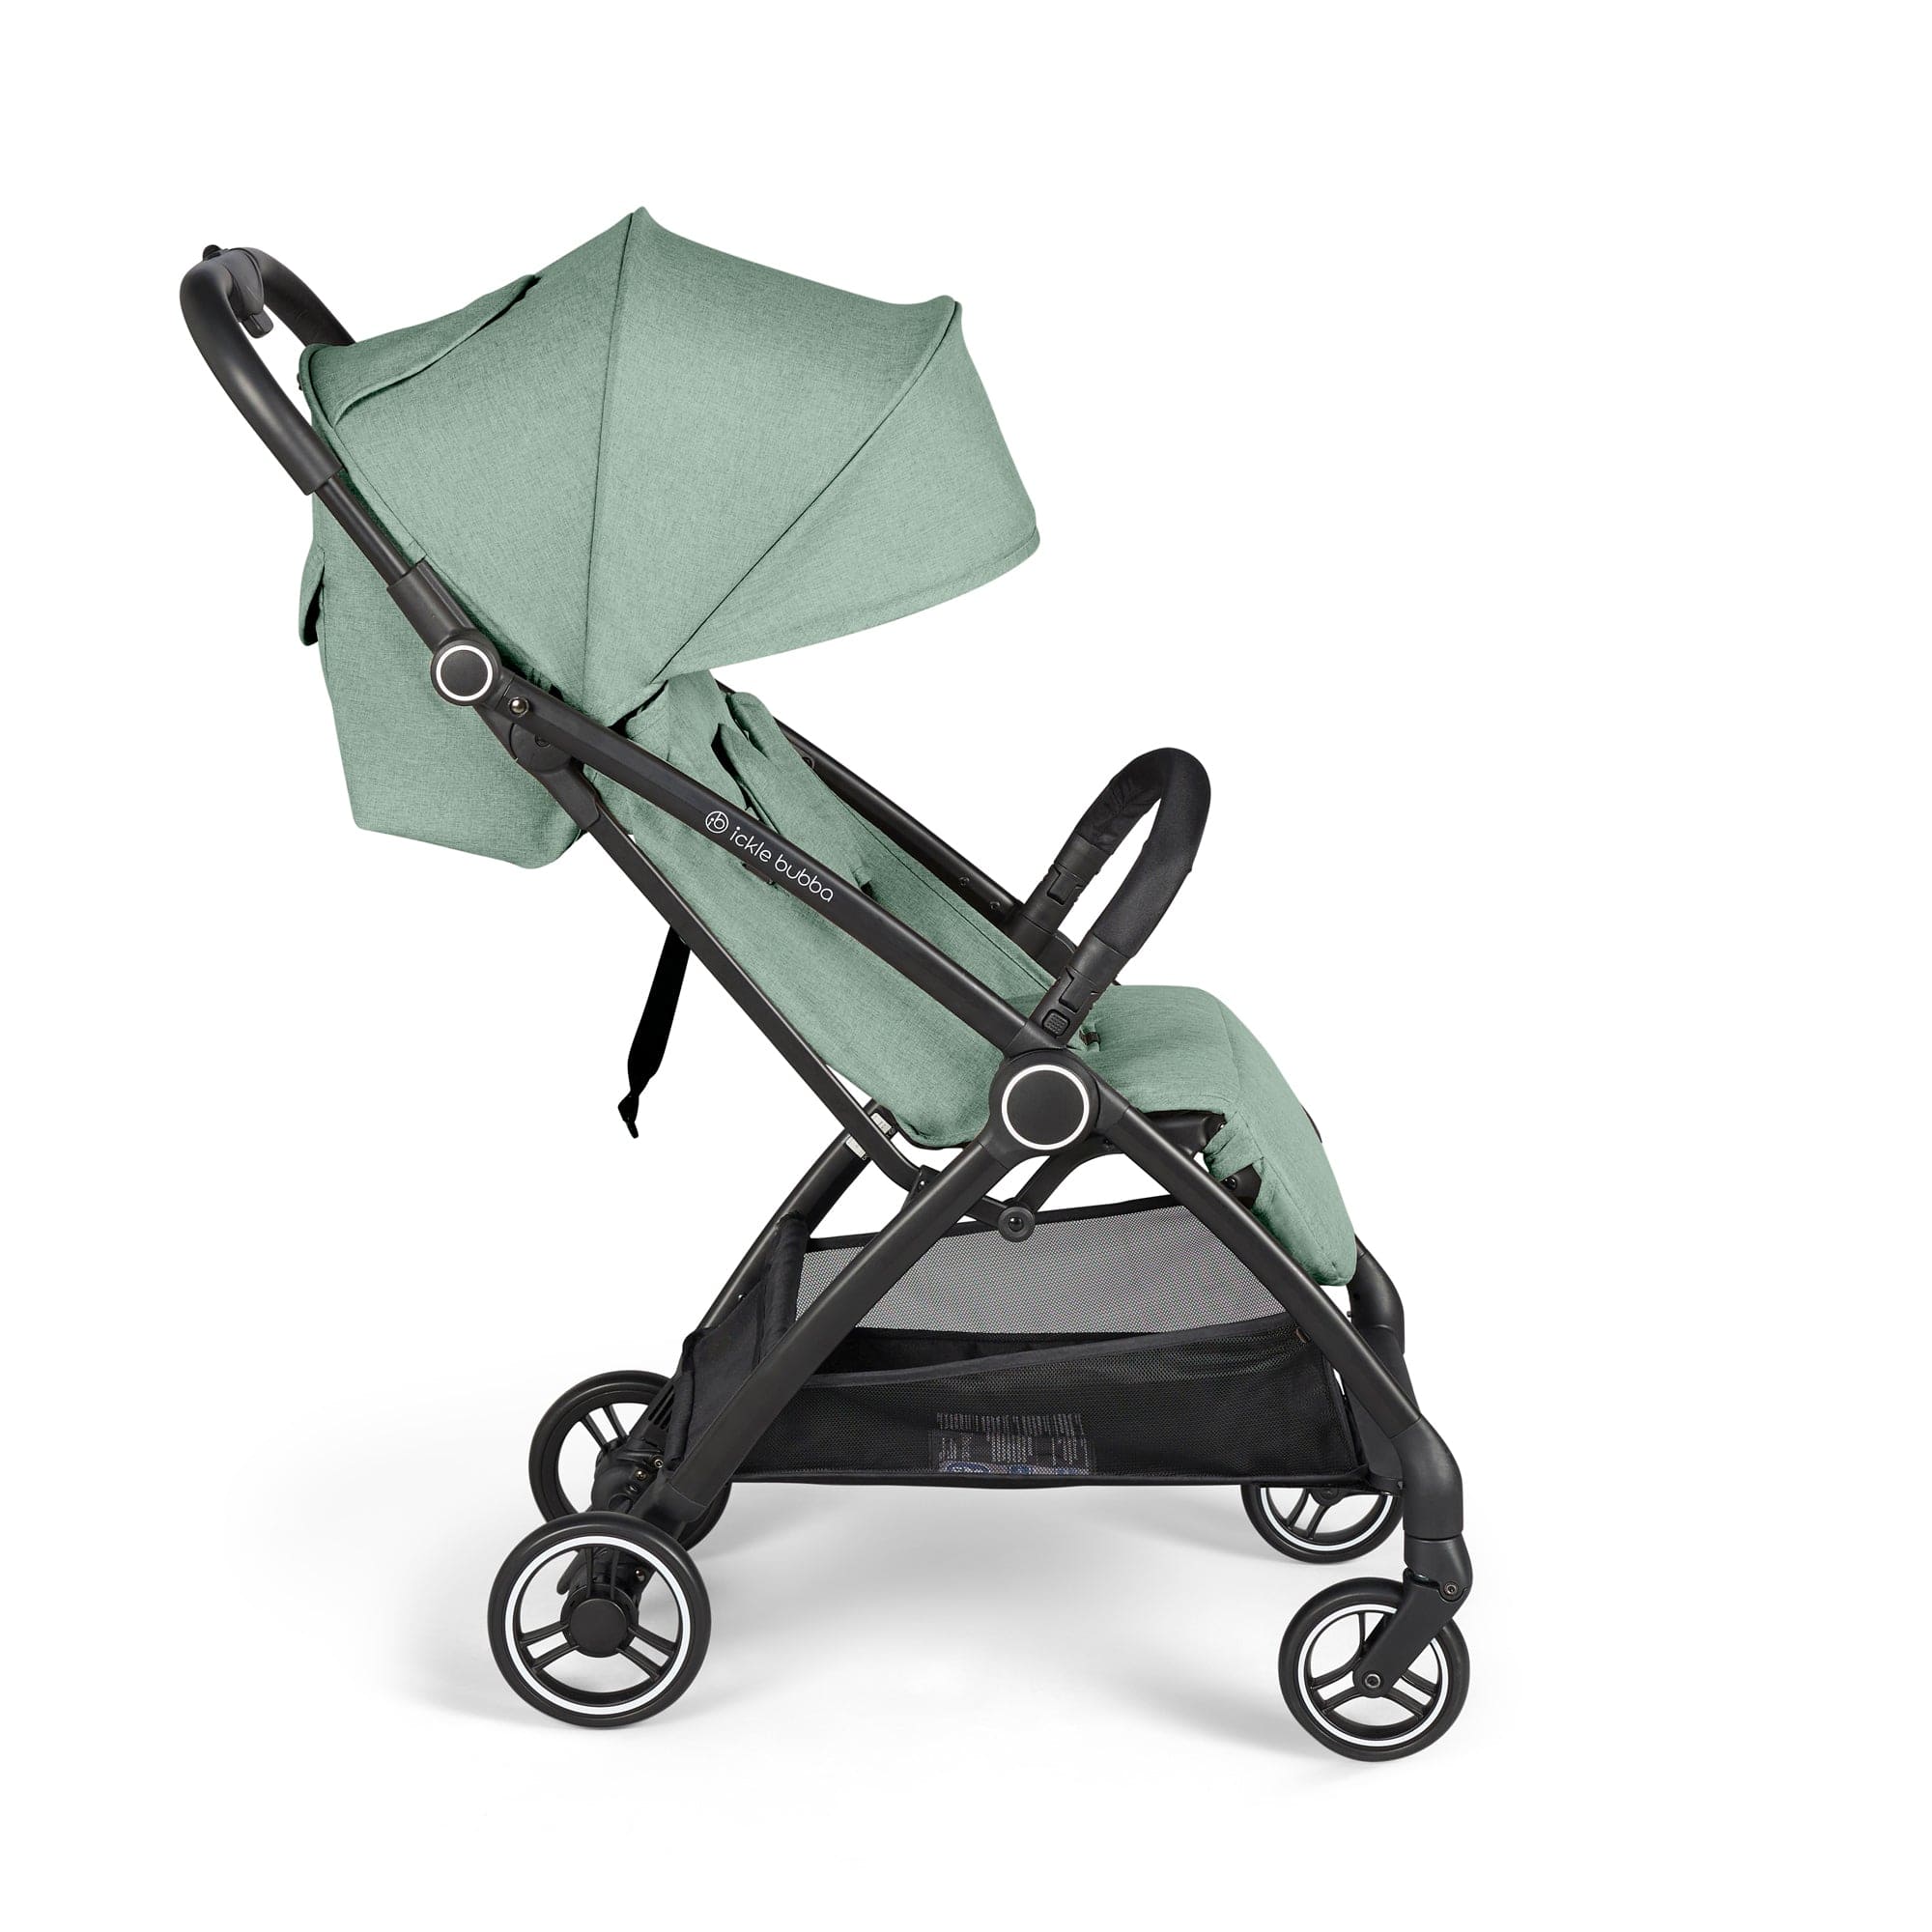 Ickle Bubba baby pushchairs Ickle Bubba Aries Autofold Stroller in Sage Green 15-005-100-152